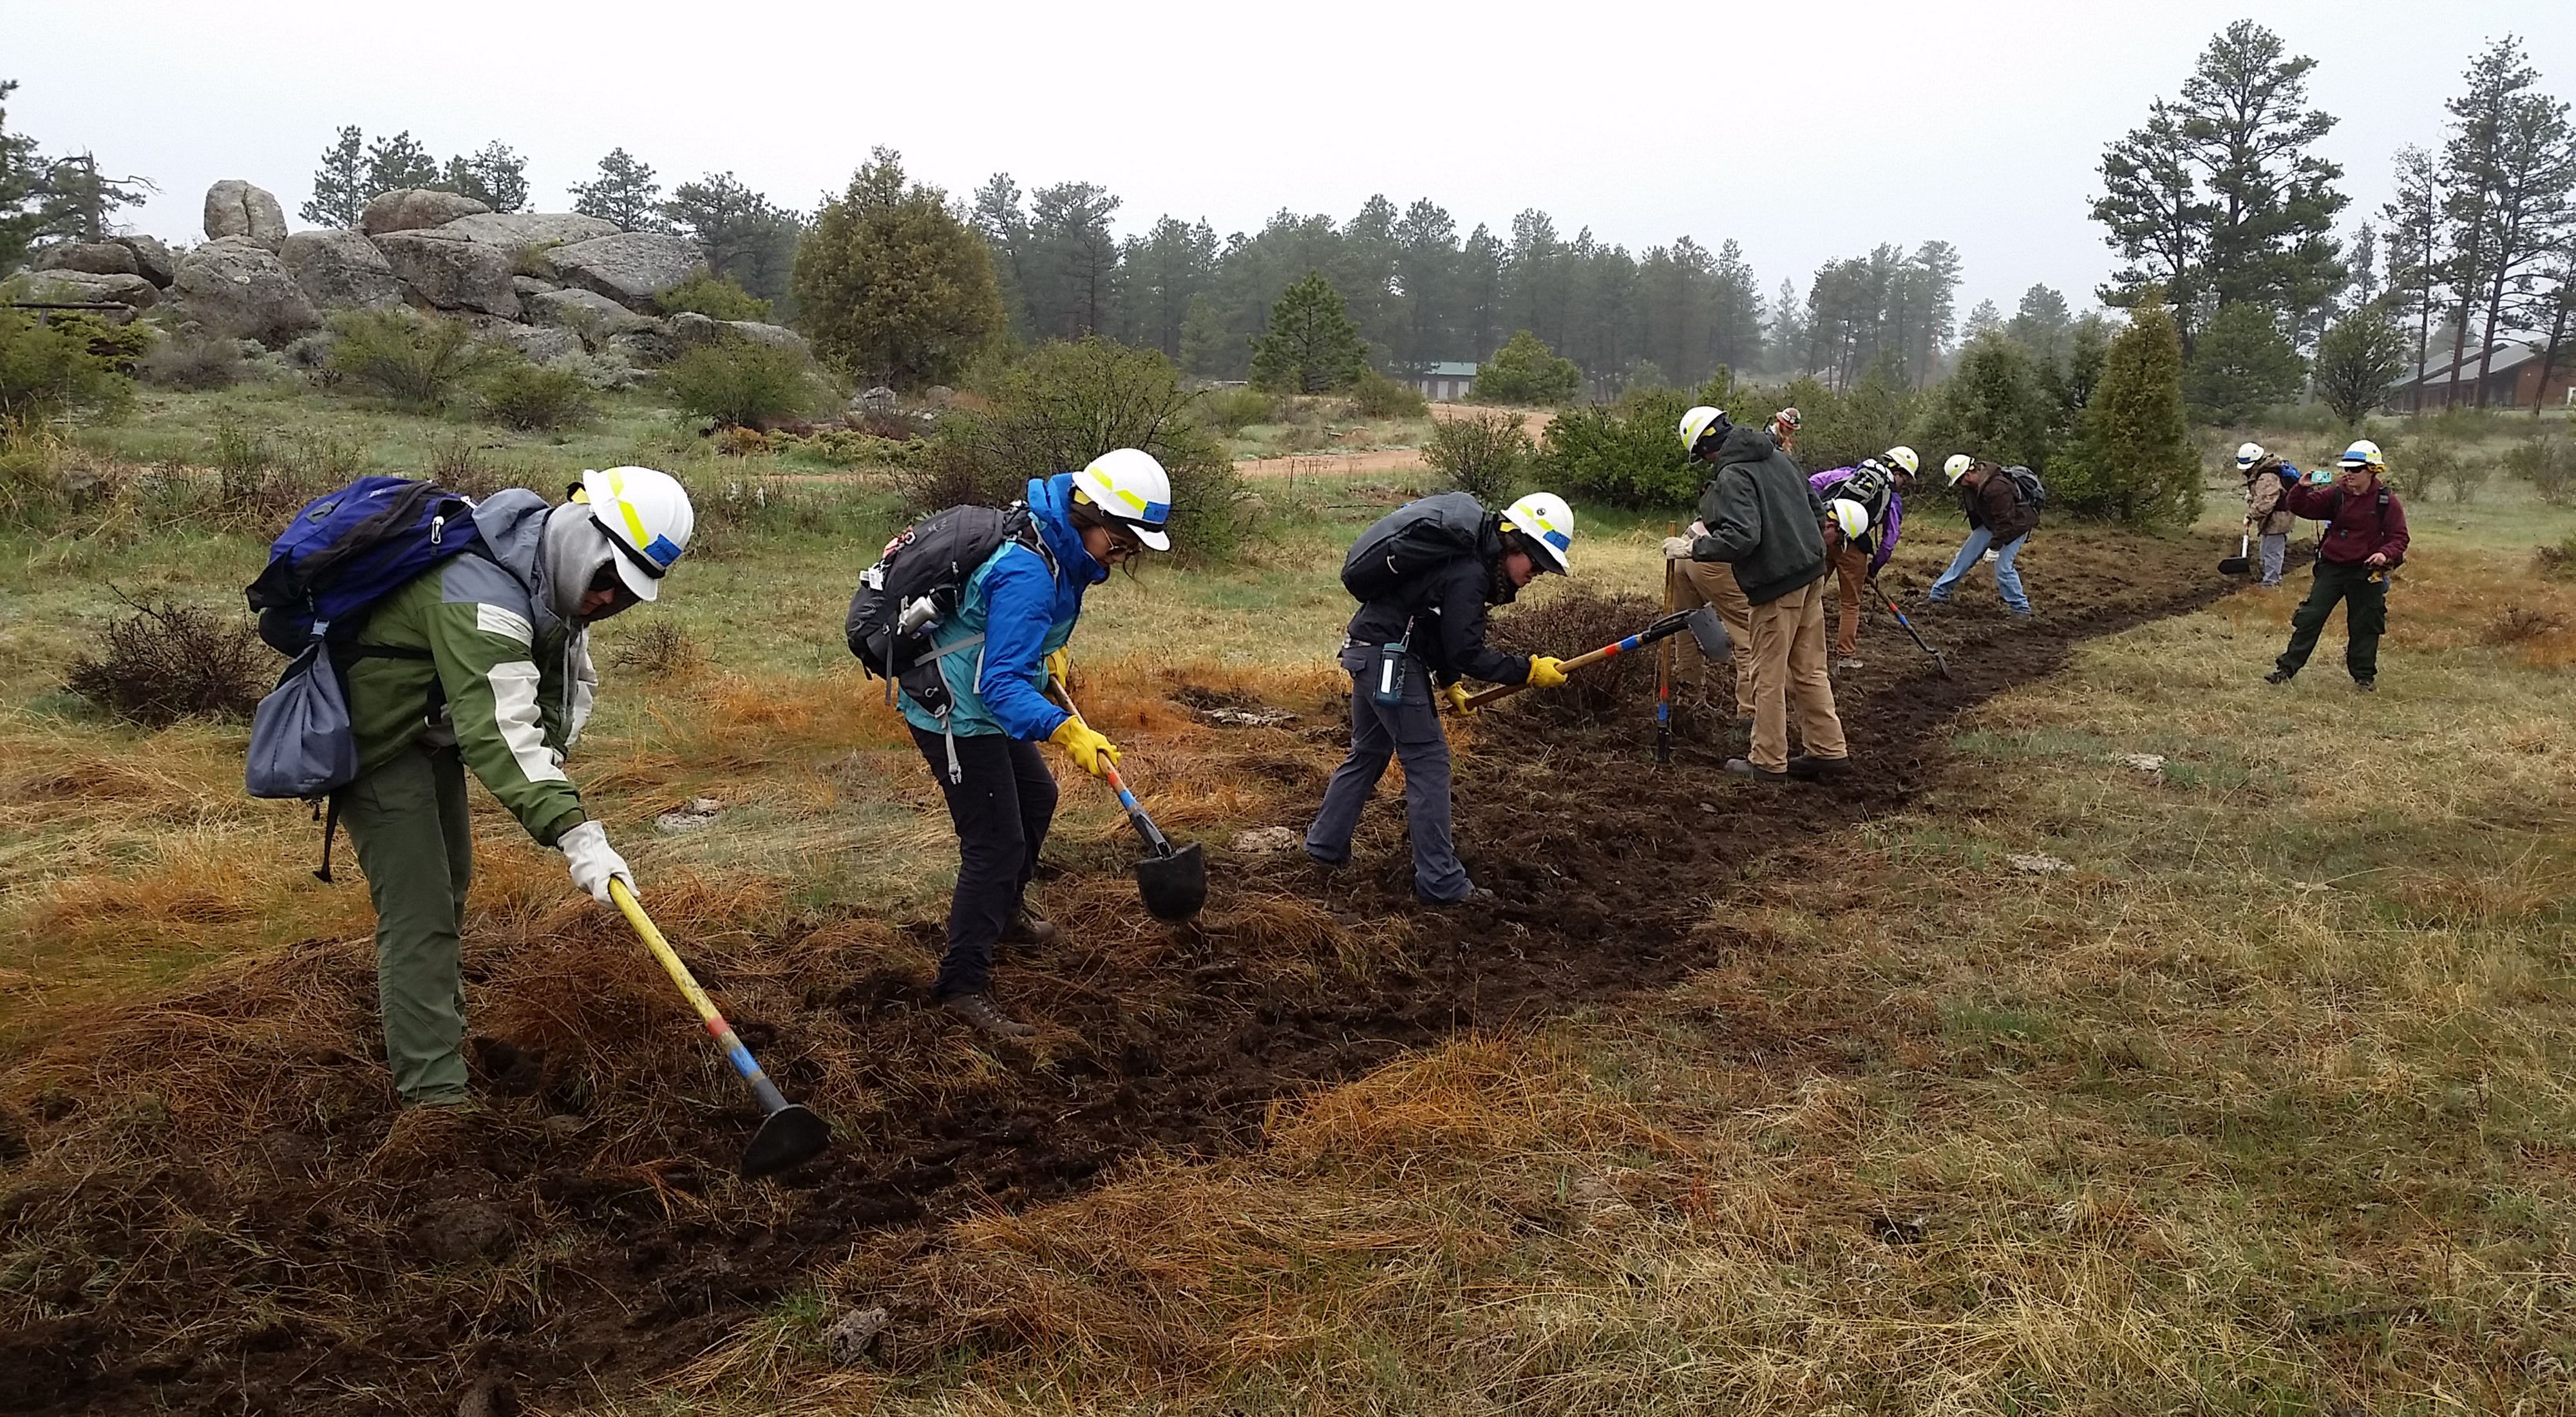 Colorado staff are working to build a qualified volunteer staff who can assist the TNC in forest restoration and fire projects.